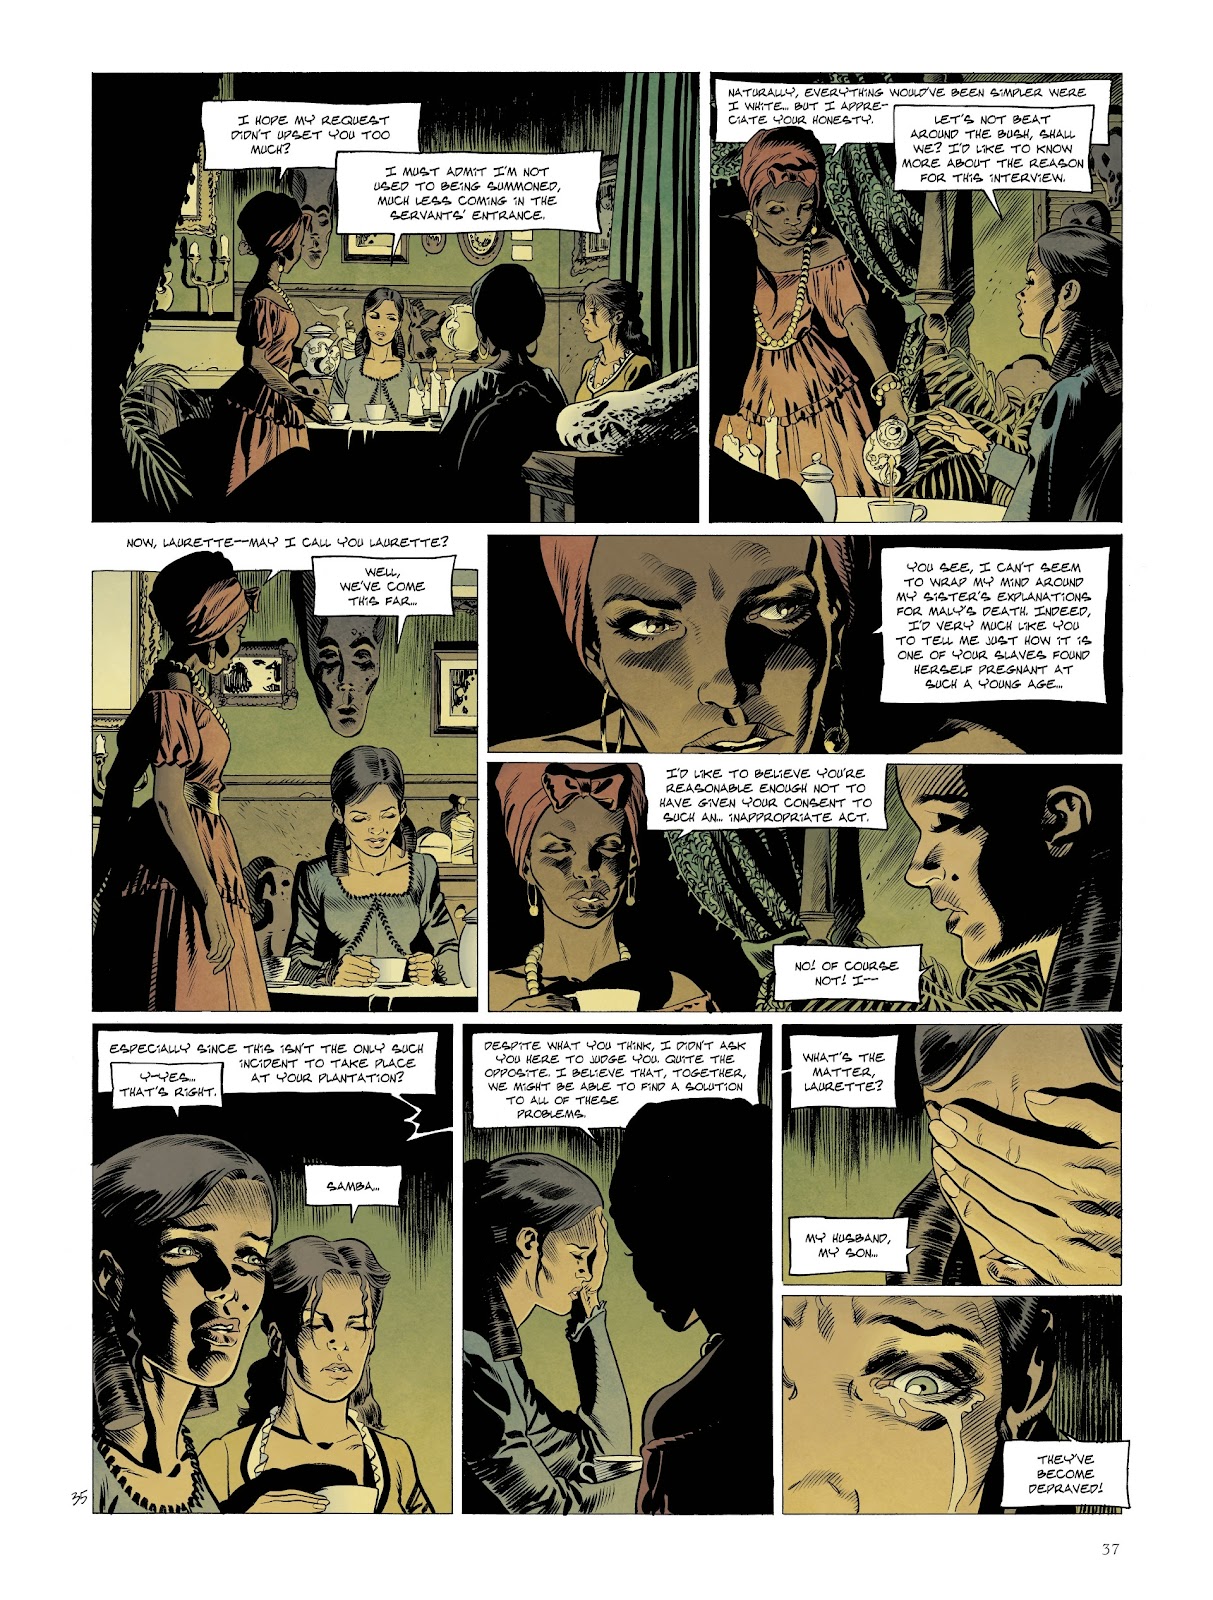 Louisiana: The Color of Blood issue 1 - Page 39